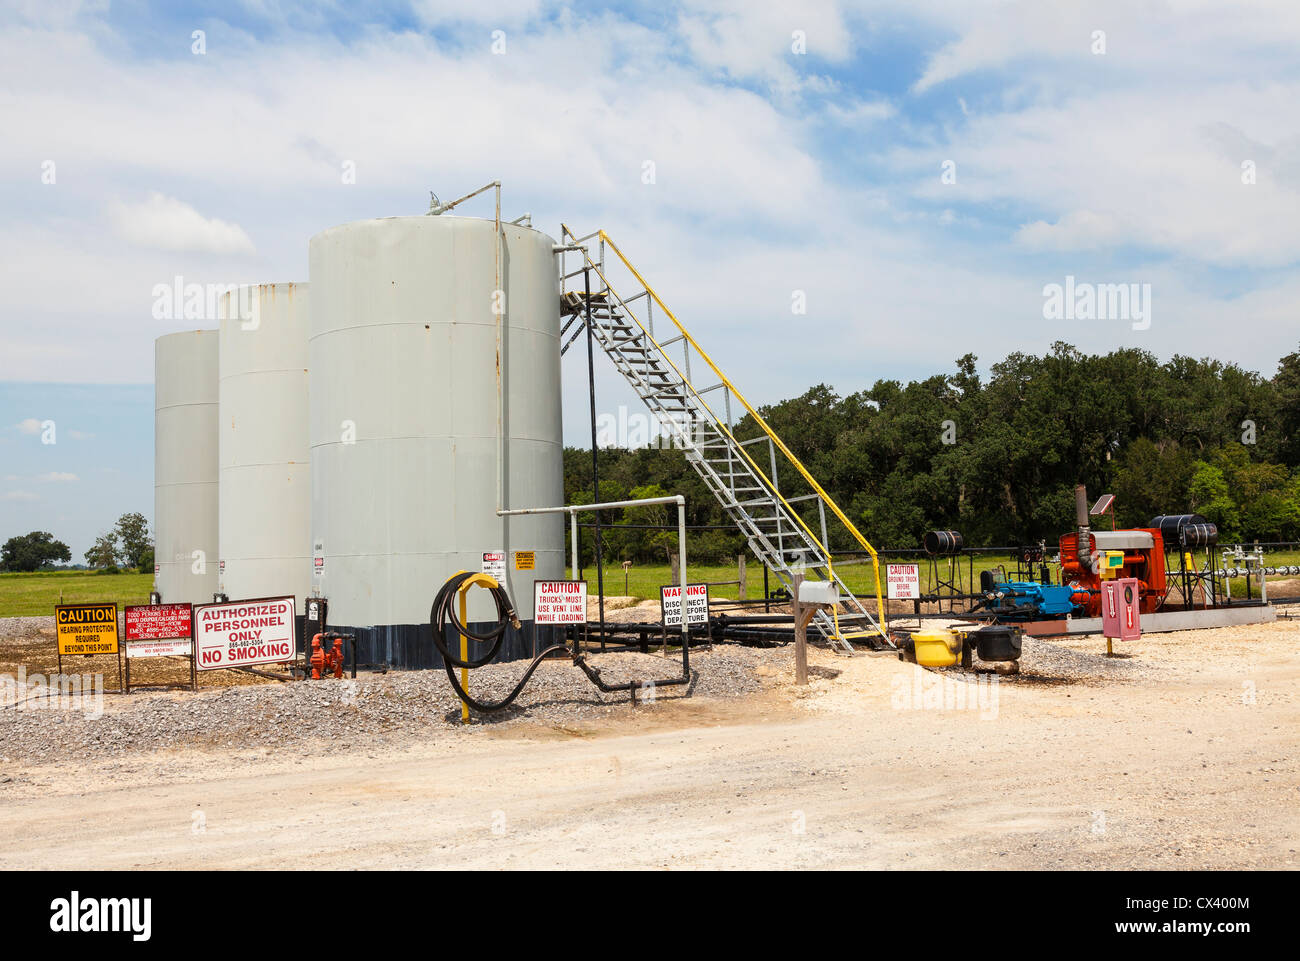 Remote crude oil pumping and truck loading facility for rural oil wells, view of storage tanks and pumps. Stock Photo